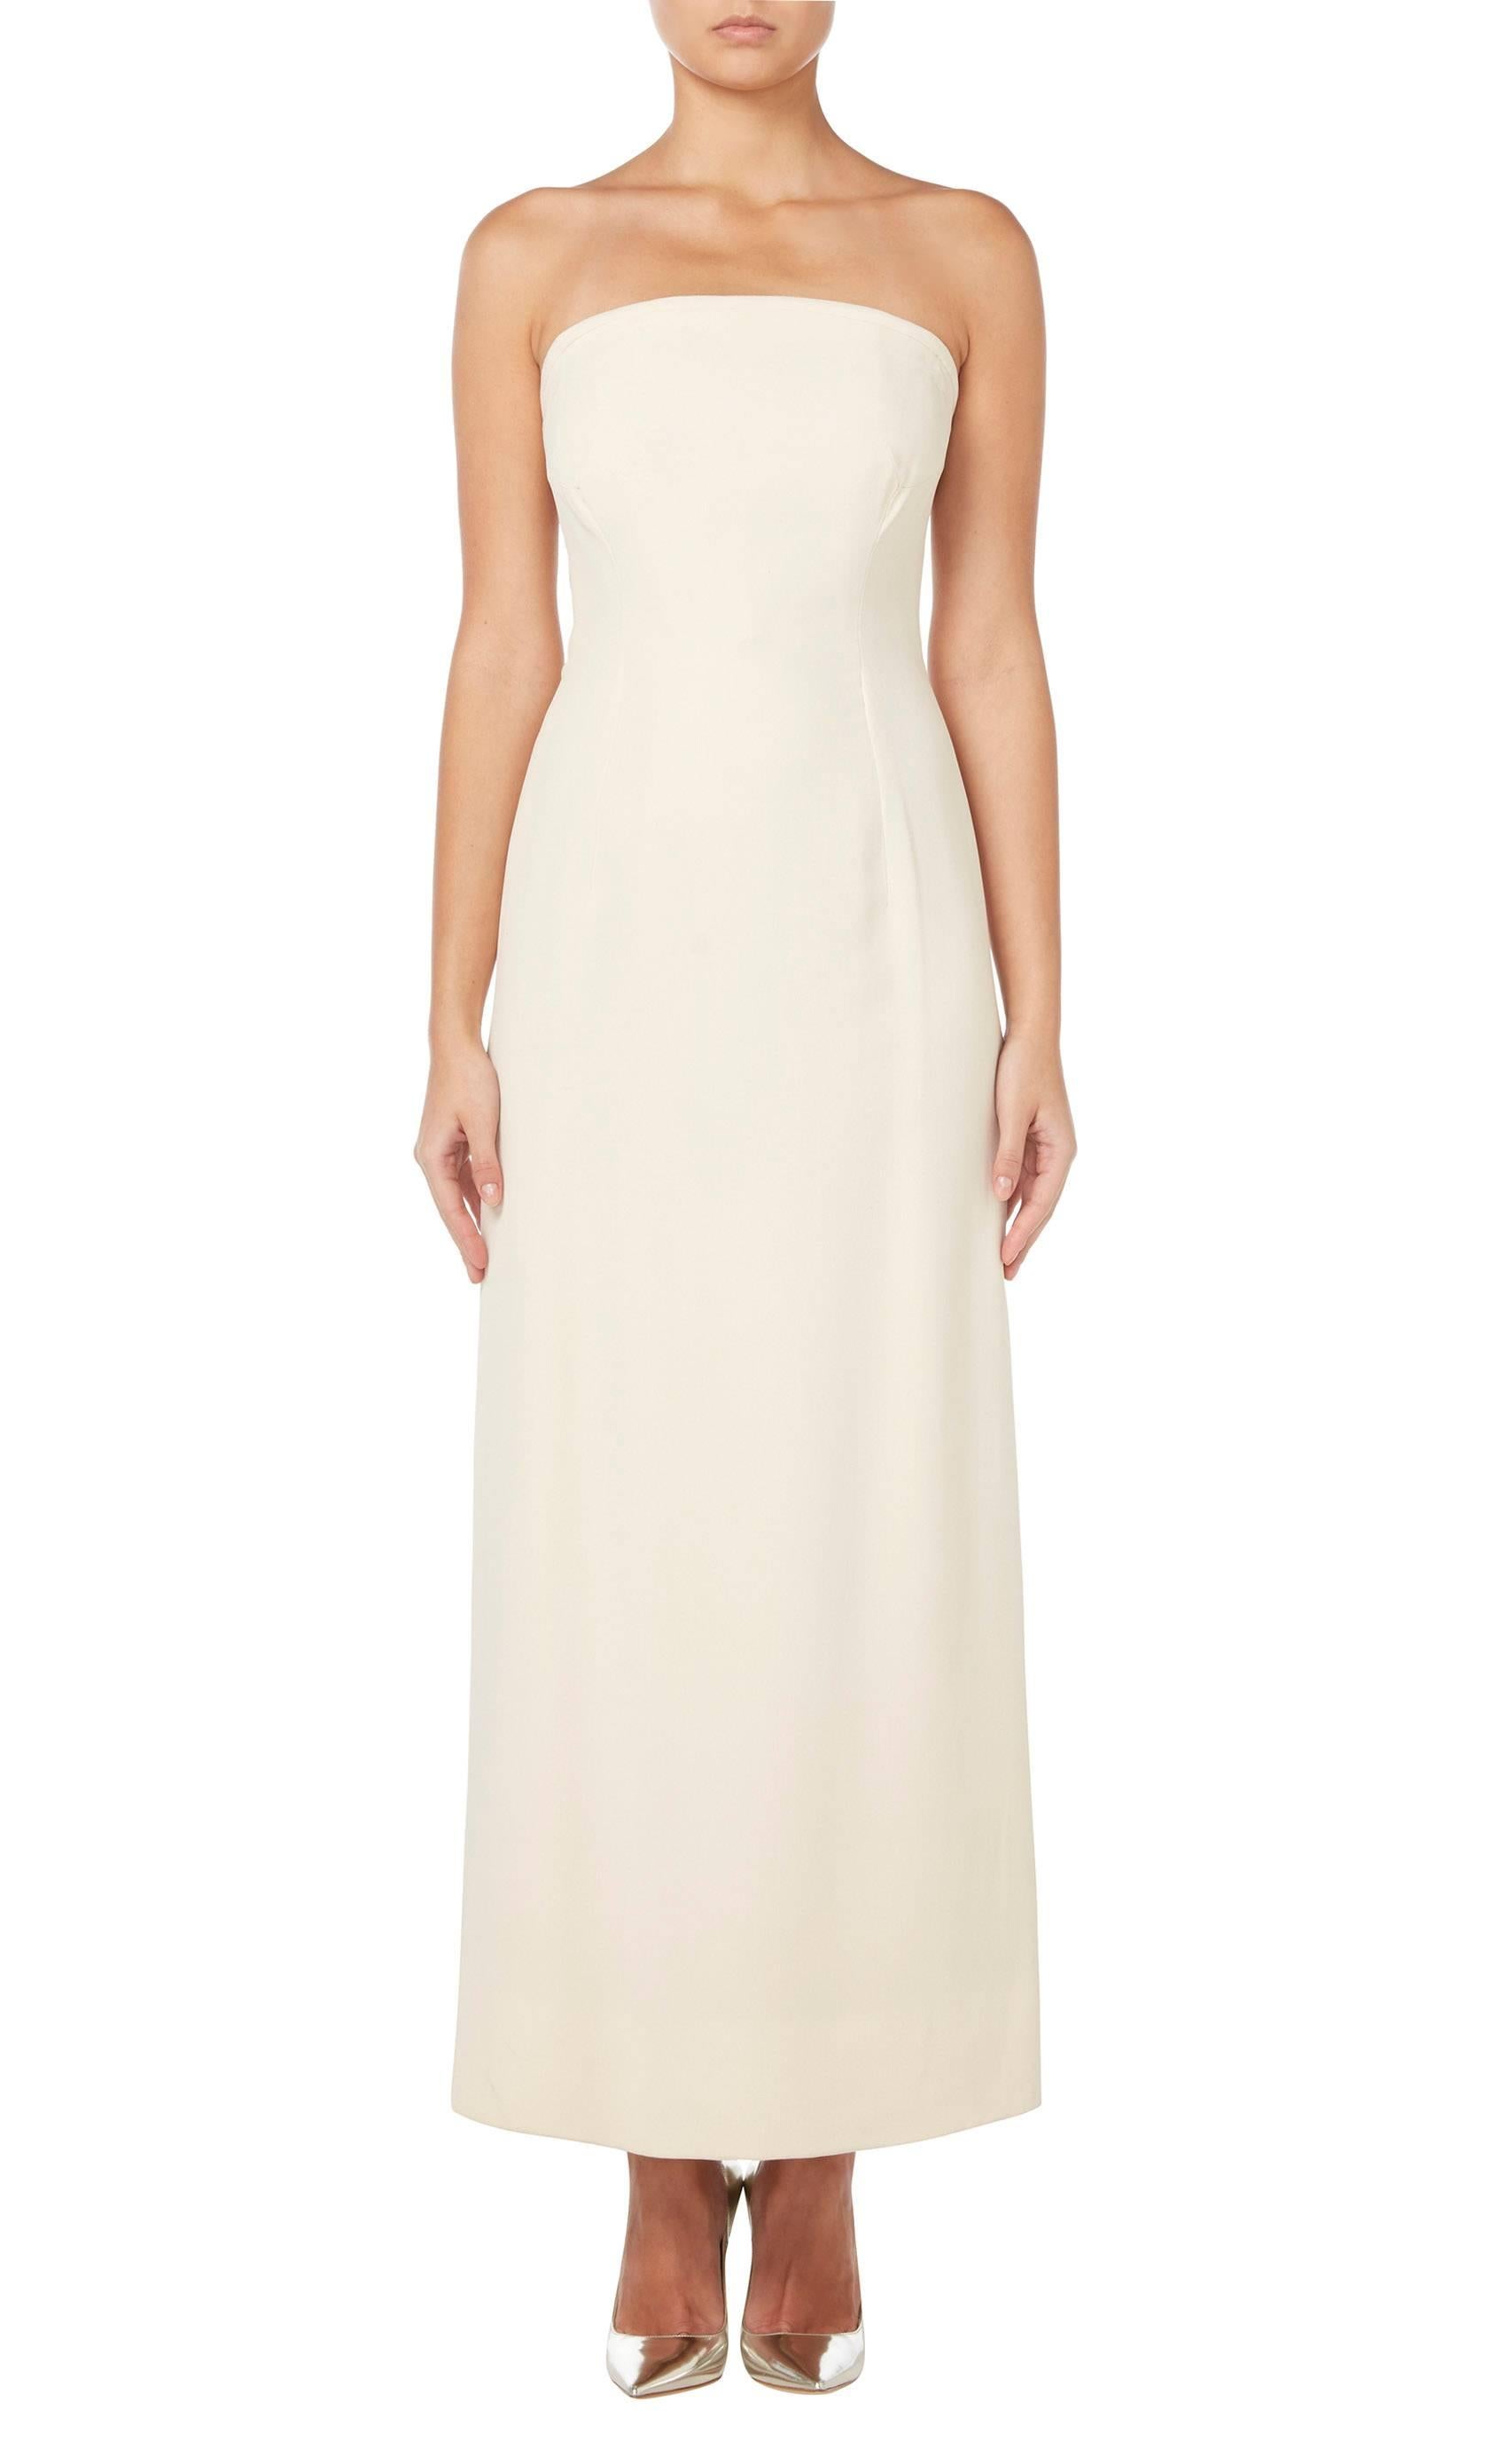 An incredibly chic and modern piece of haute couture, this Jacques Griffe strapless dress is constructed in ivory silk and features an internal boned corset. The column cut of the dress gives a clean silhouette, while a subtle tie detail to back